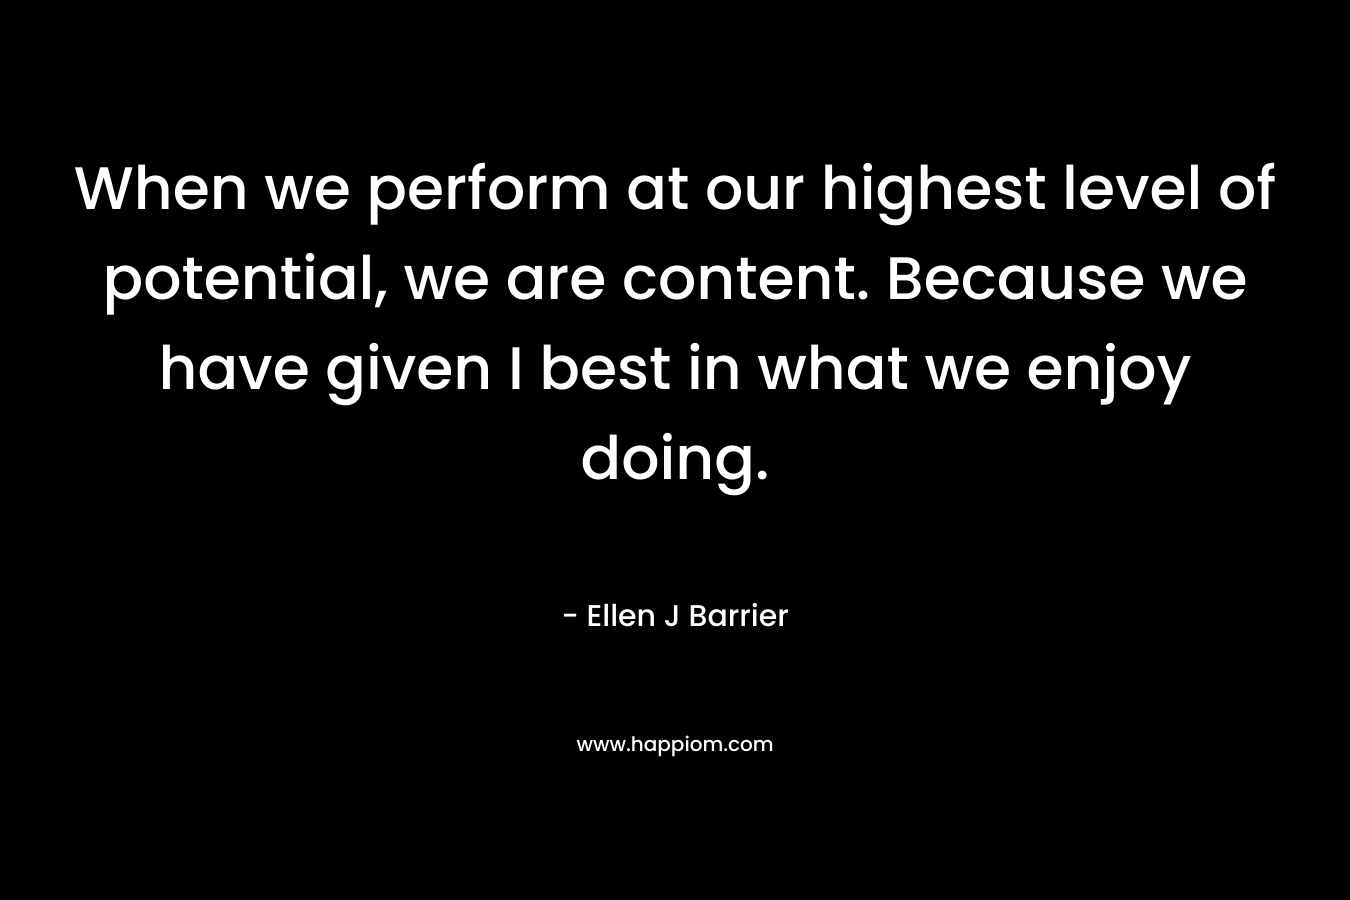 When we perform at our highest level of potential, we are content. Because we have given I best in what we enjoy doing.